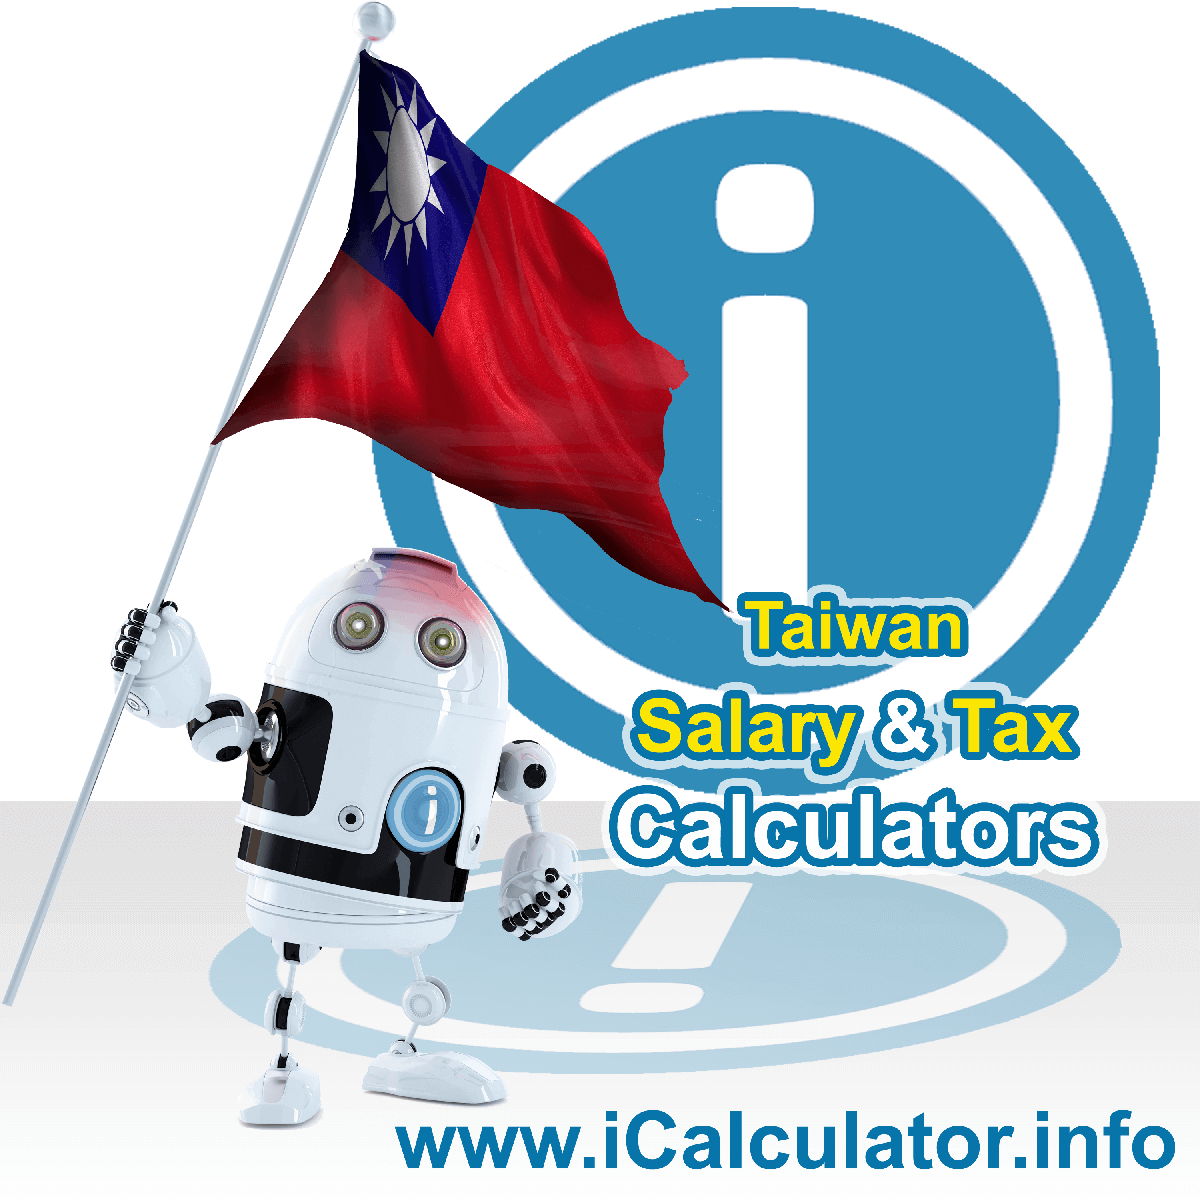 Taiwan Tax Calculator. This image shows the Taiwan flag and information relating to the tax formula for the Taiwan Salary Calculator